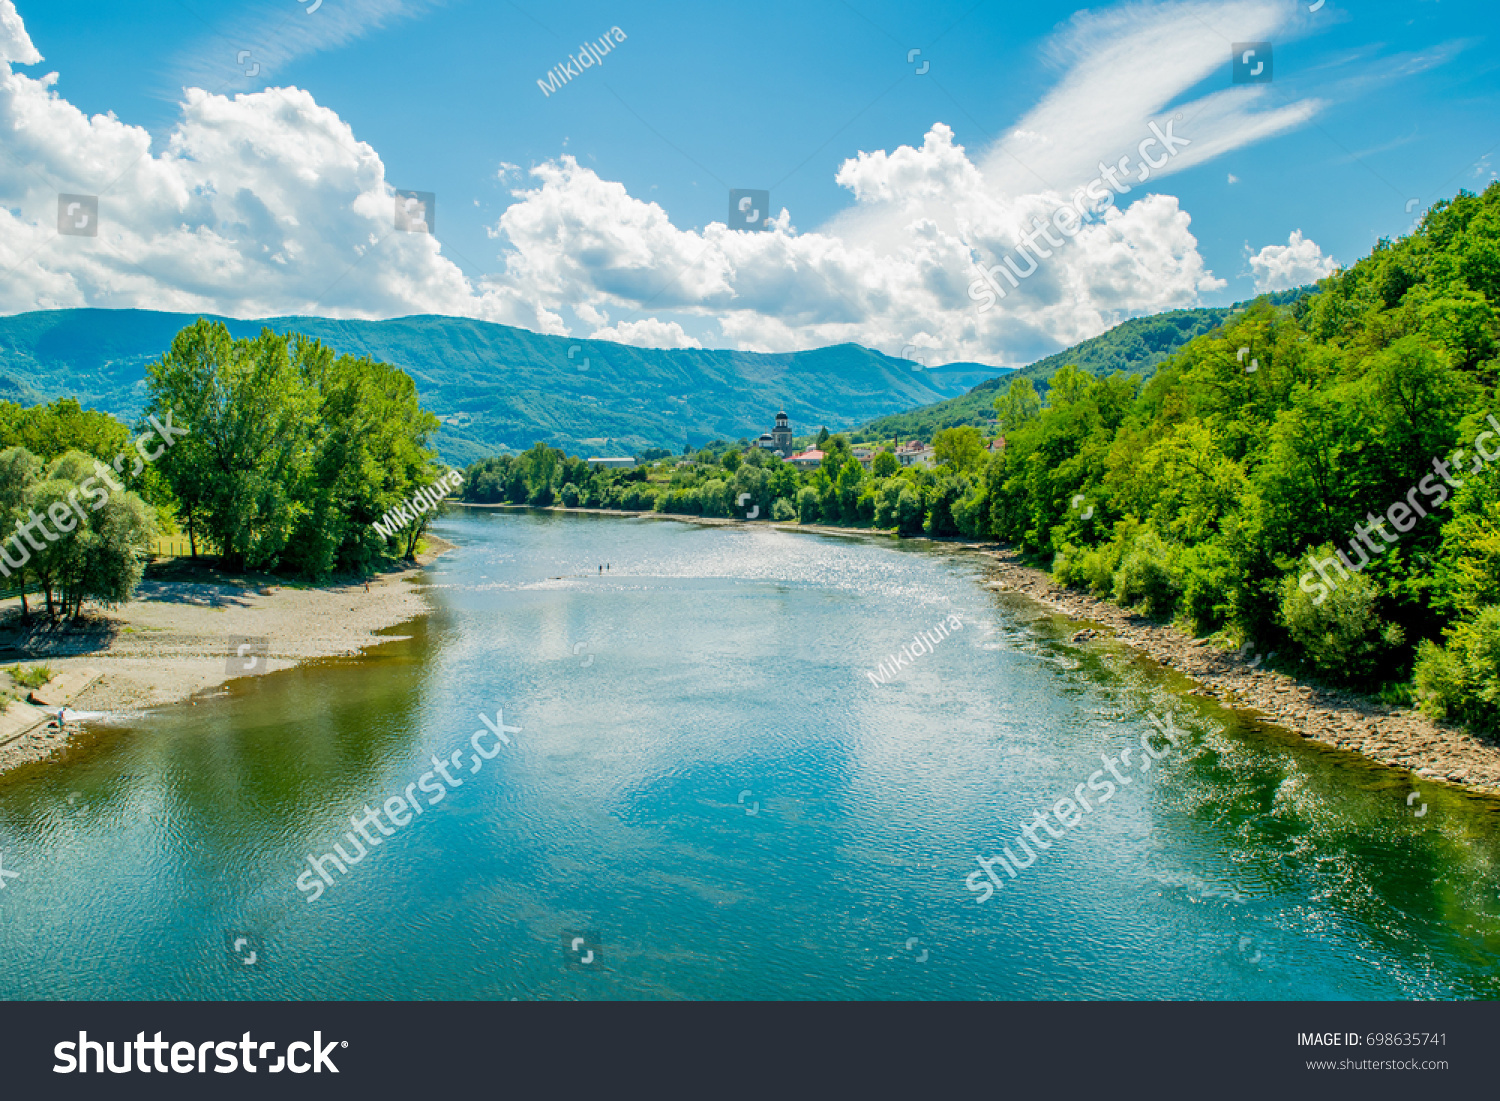 Majestic look to the River in eastern Serbia. Beautiful landscape include sky, clouds, mountains, river, forest, stone coast and reflection.  #698635741